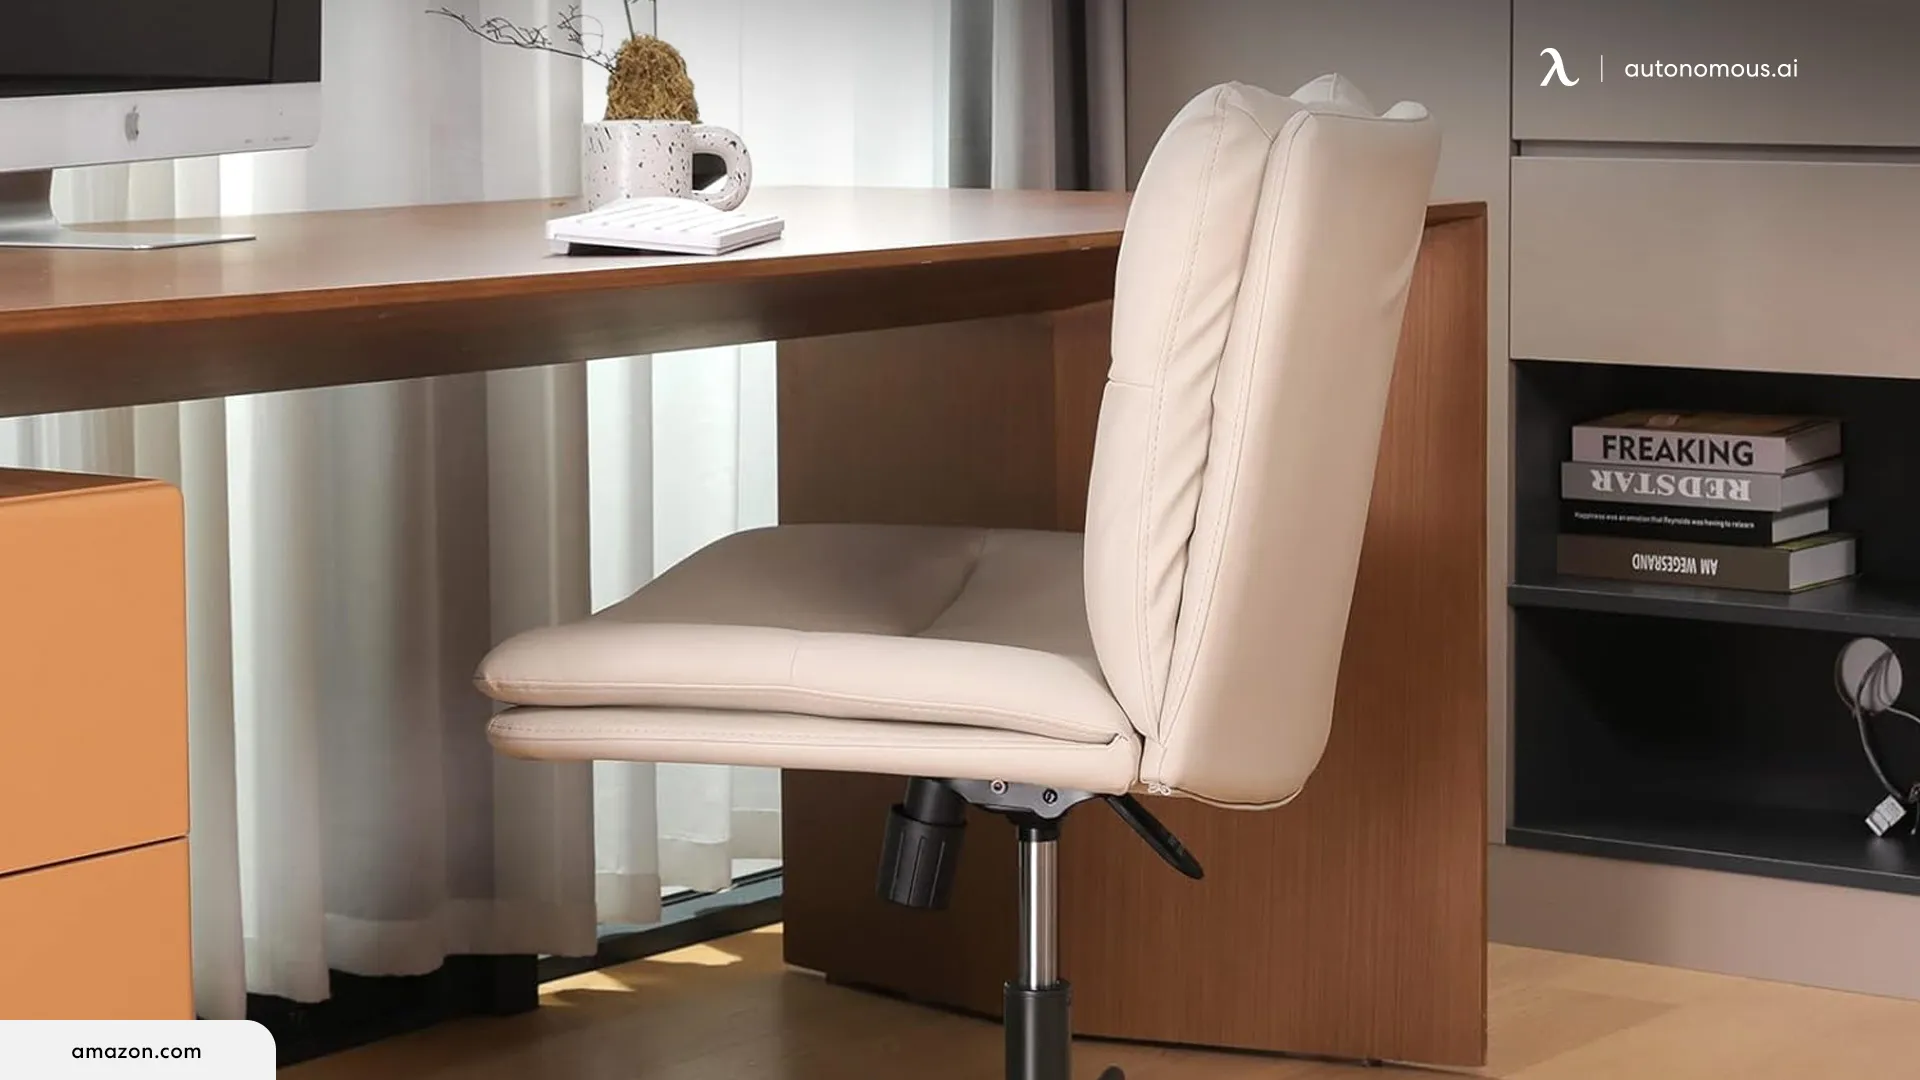 Why Are Criss Cross Desk Chairs So Popular?